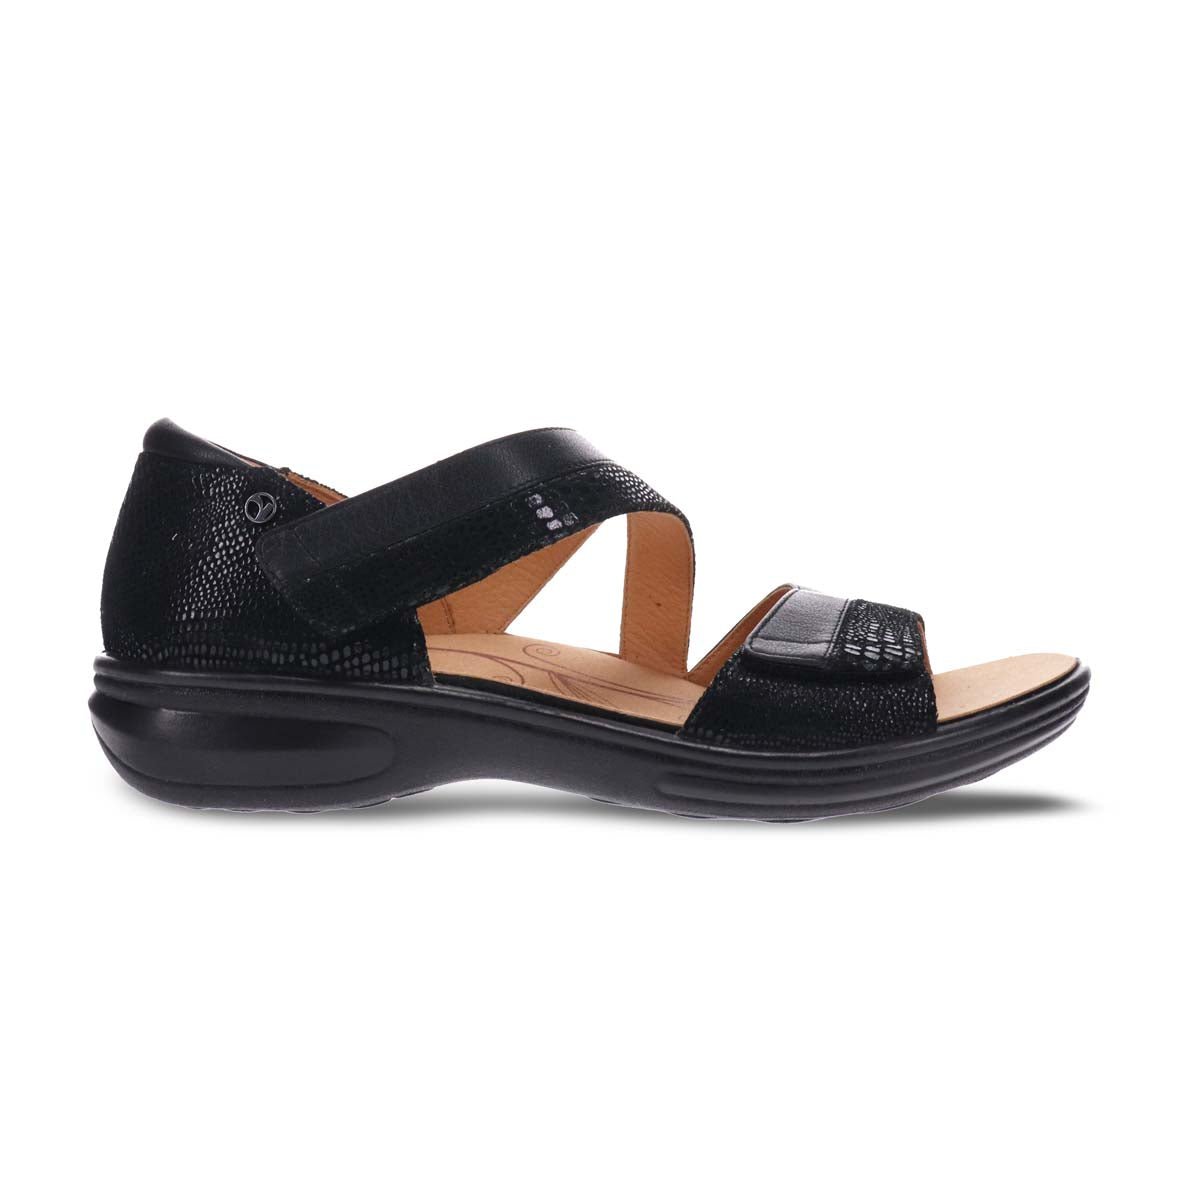 REVERE MAURITIUS WOMEN SANDALS IN BLACK FRENCH/LIZARD - TLW Shoes